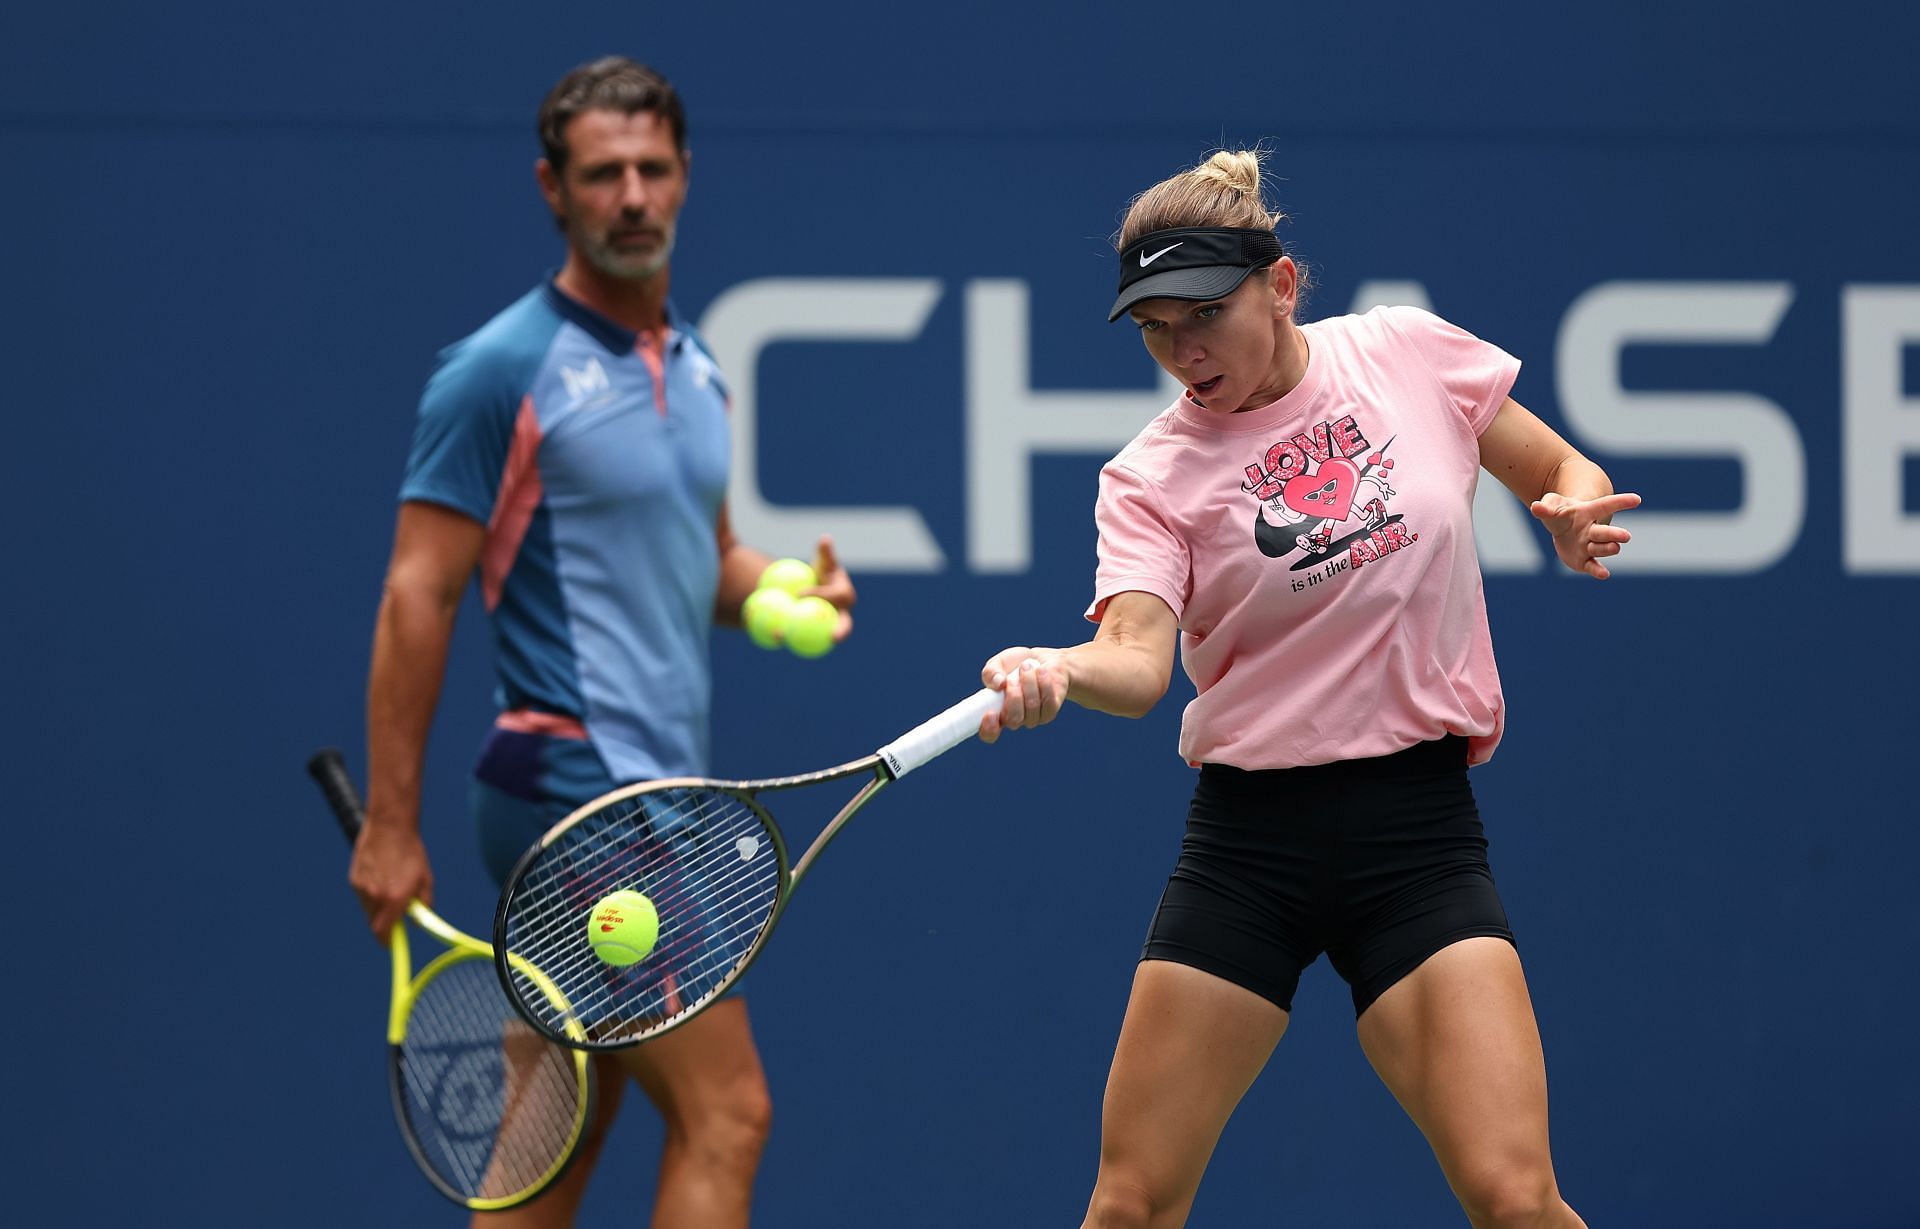 Patrick Mouratoglou and Simona Halep at the 2022 US Open.